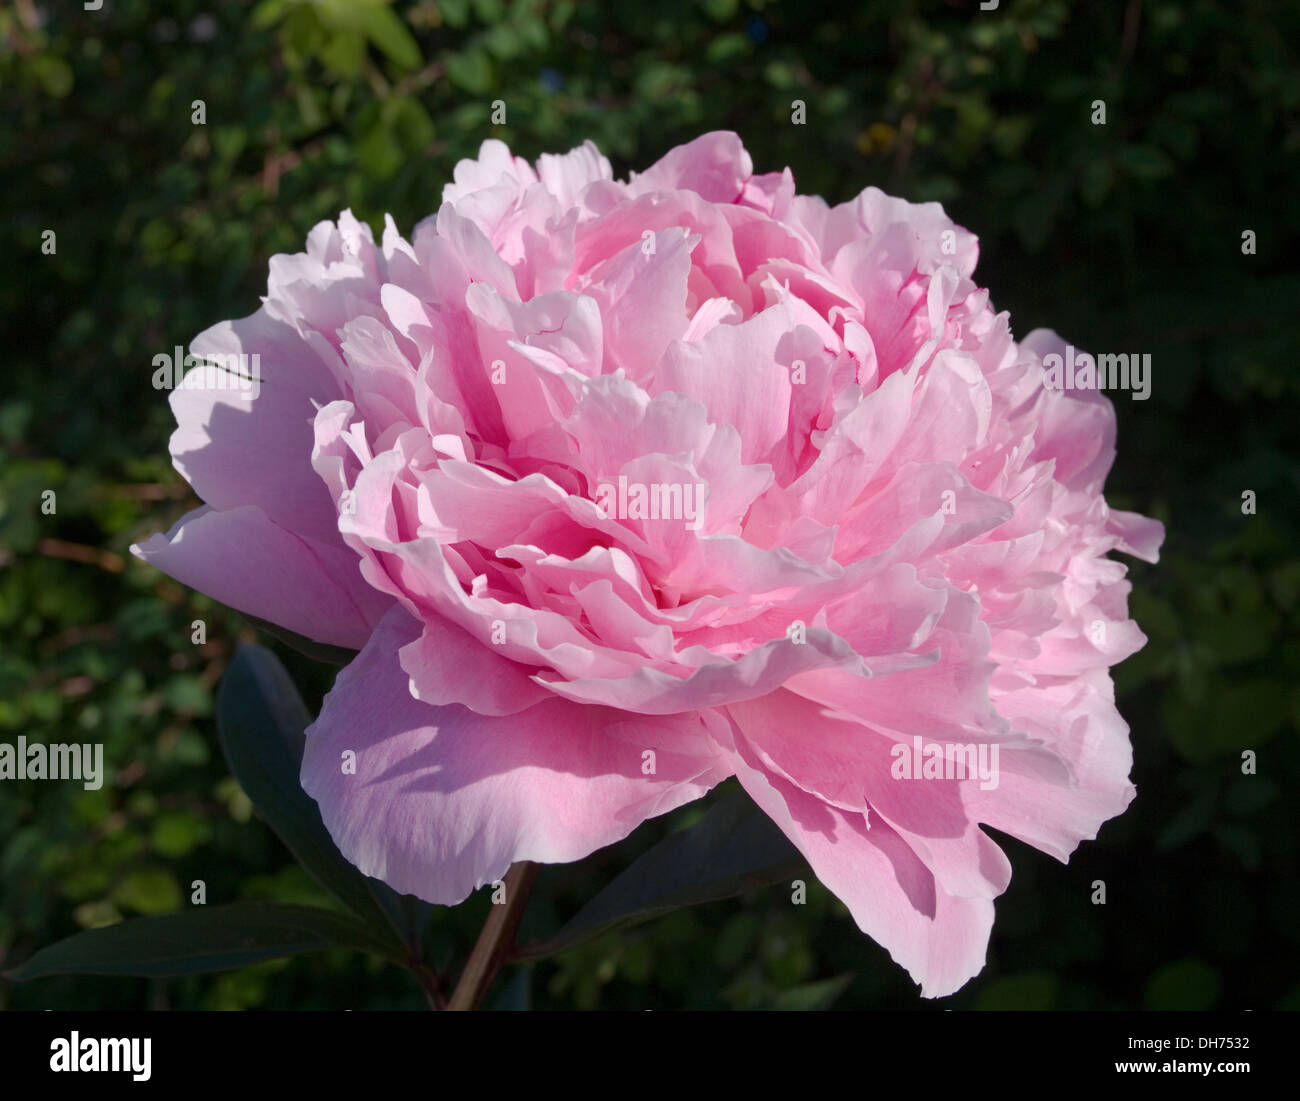 Close up of pink peony in flower against a background of dark foliage, early morning sunlight, English garden Stock Photo